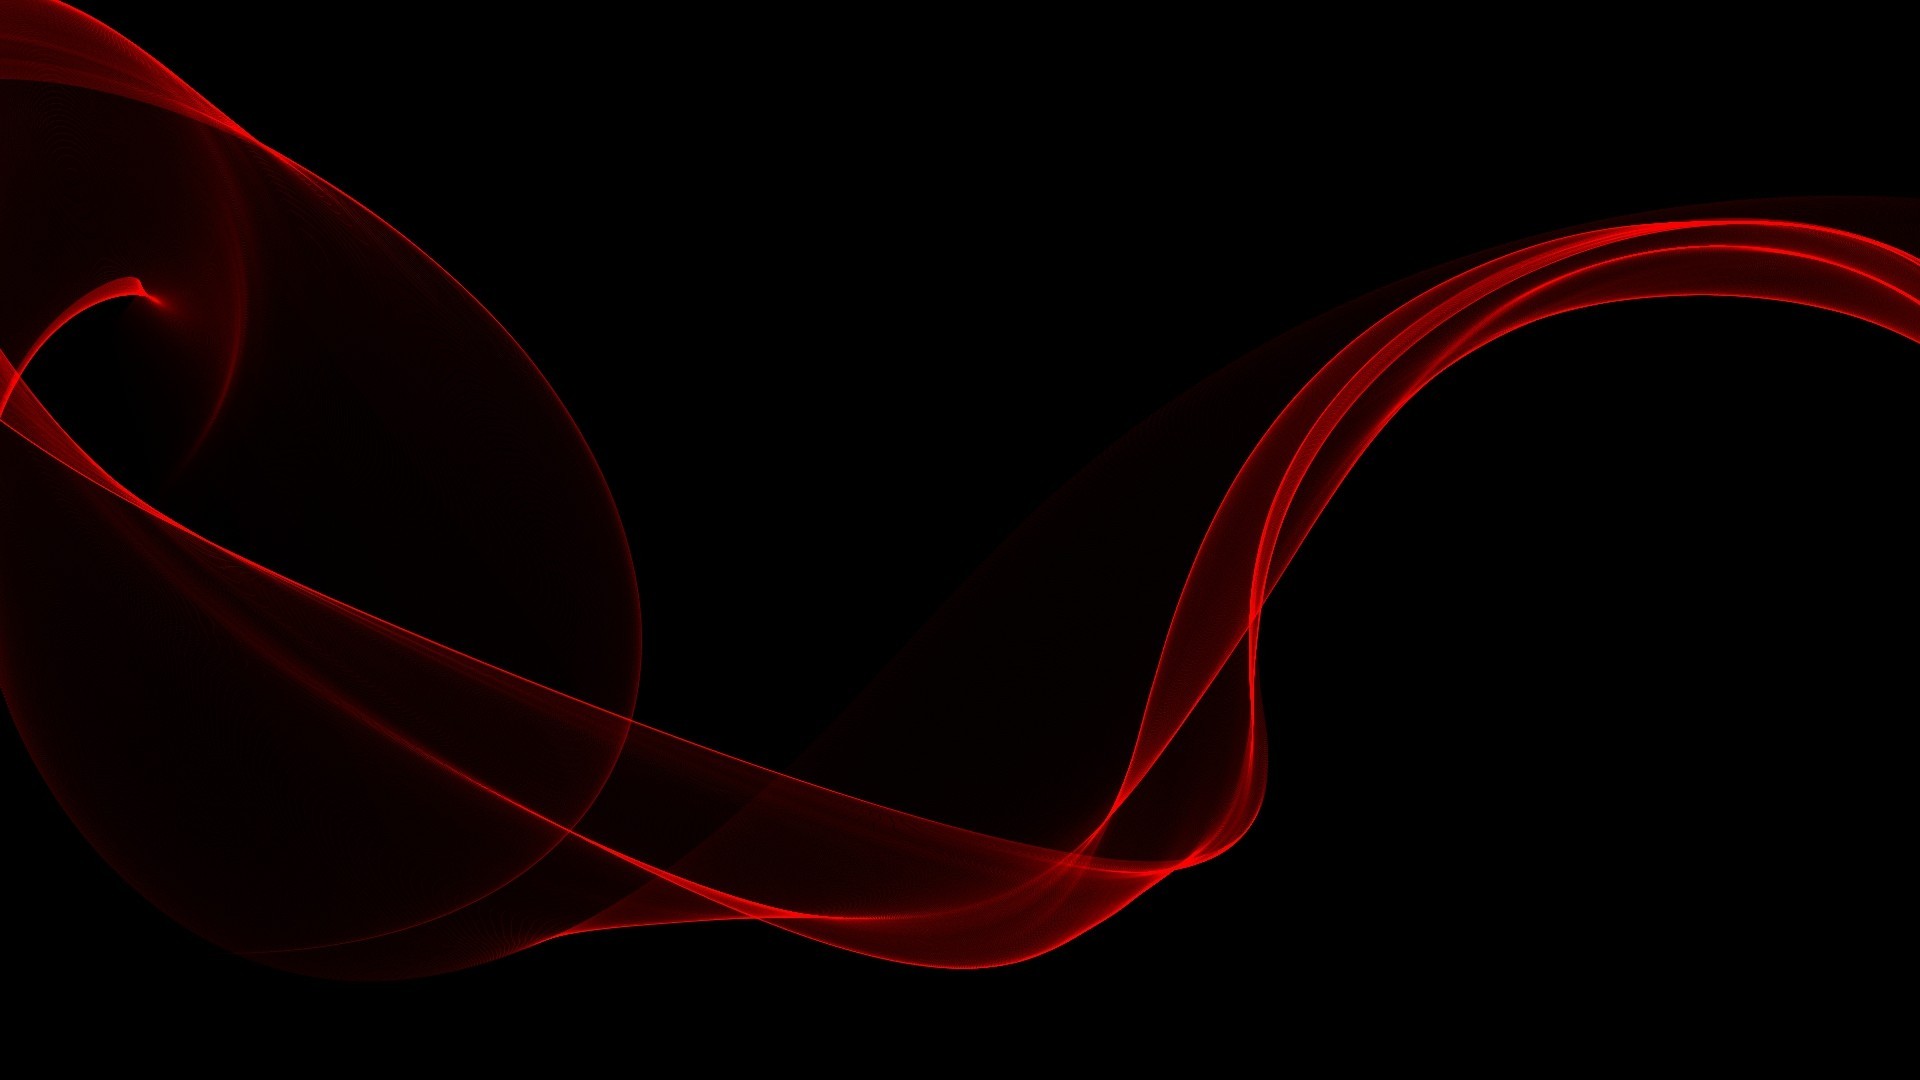 Black And Red Background Wallpaper Hd 2020 Live Wallpaper Hd